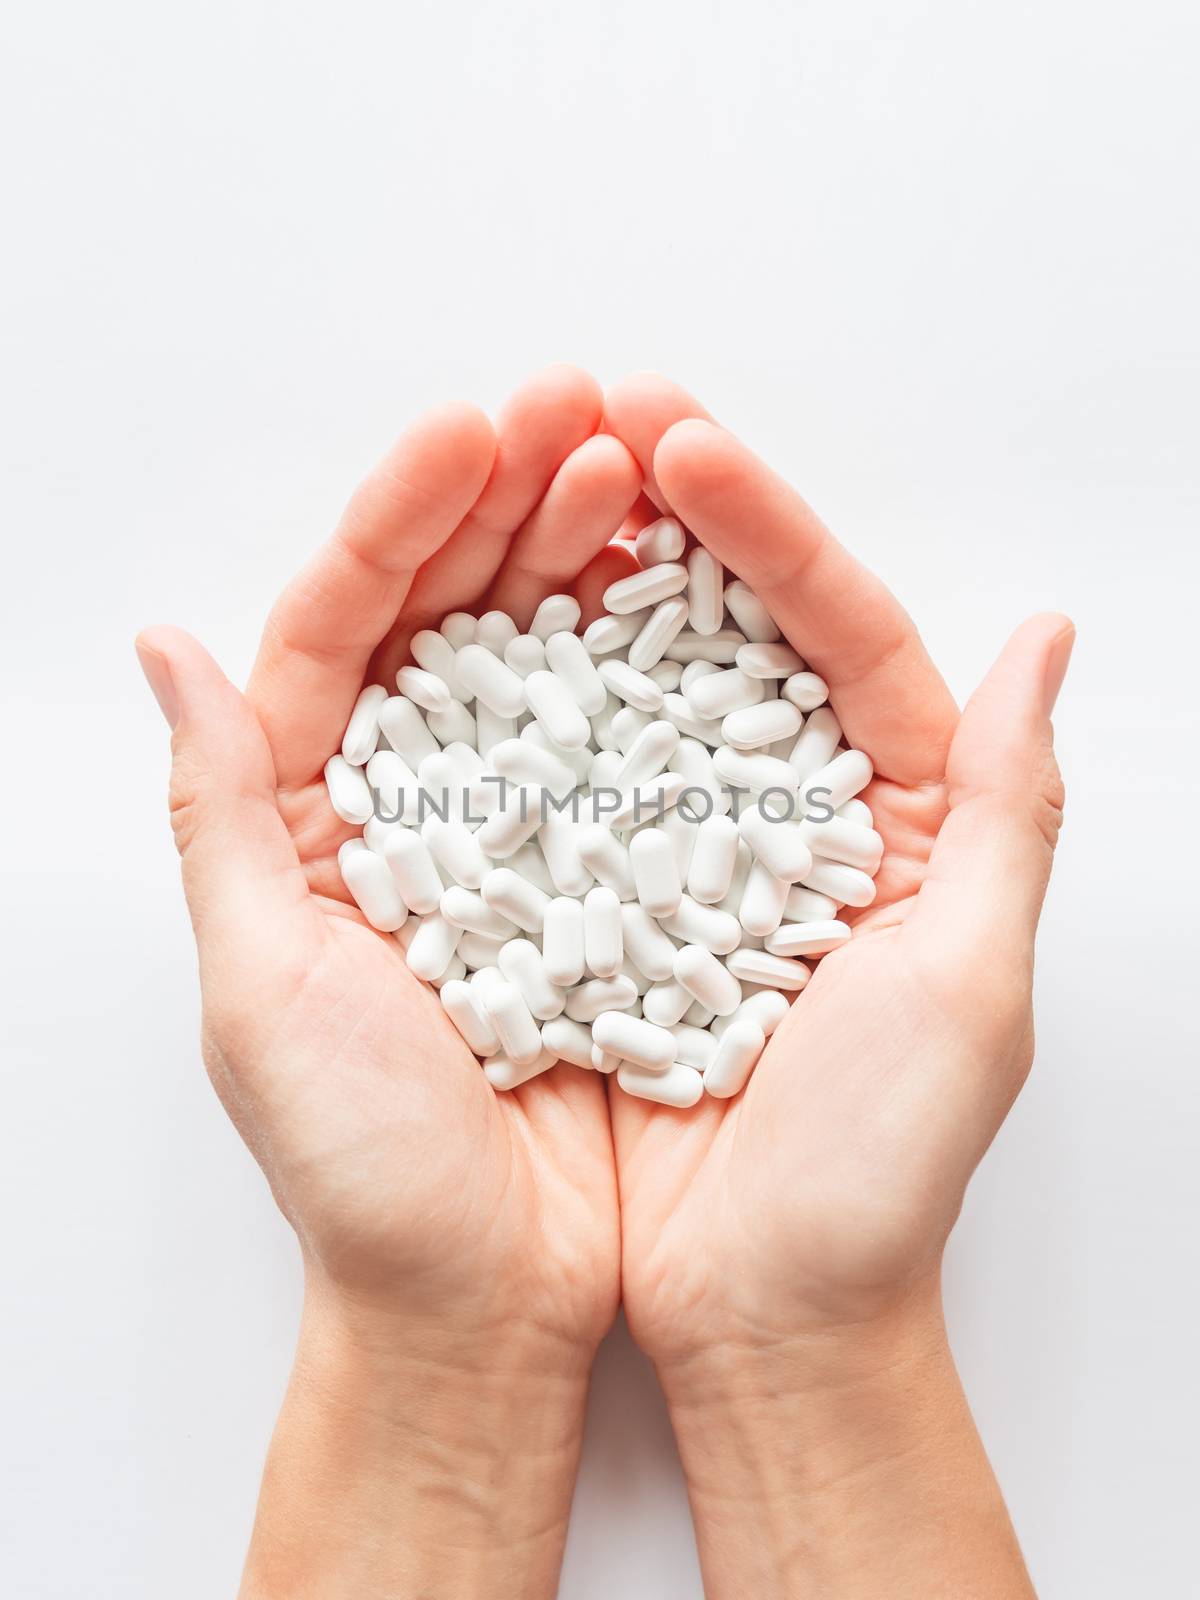 Palm hands full of white scattering pills. Woman gripes hand with capsules with medicines on light background. Flat lay, top view.